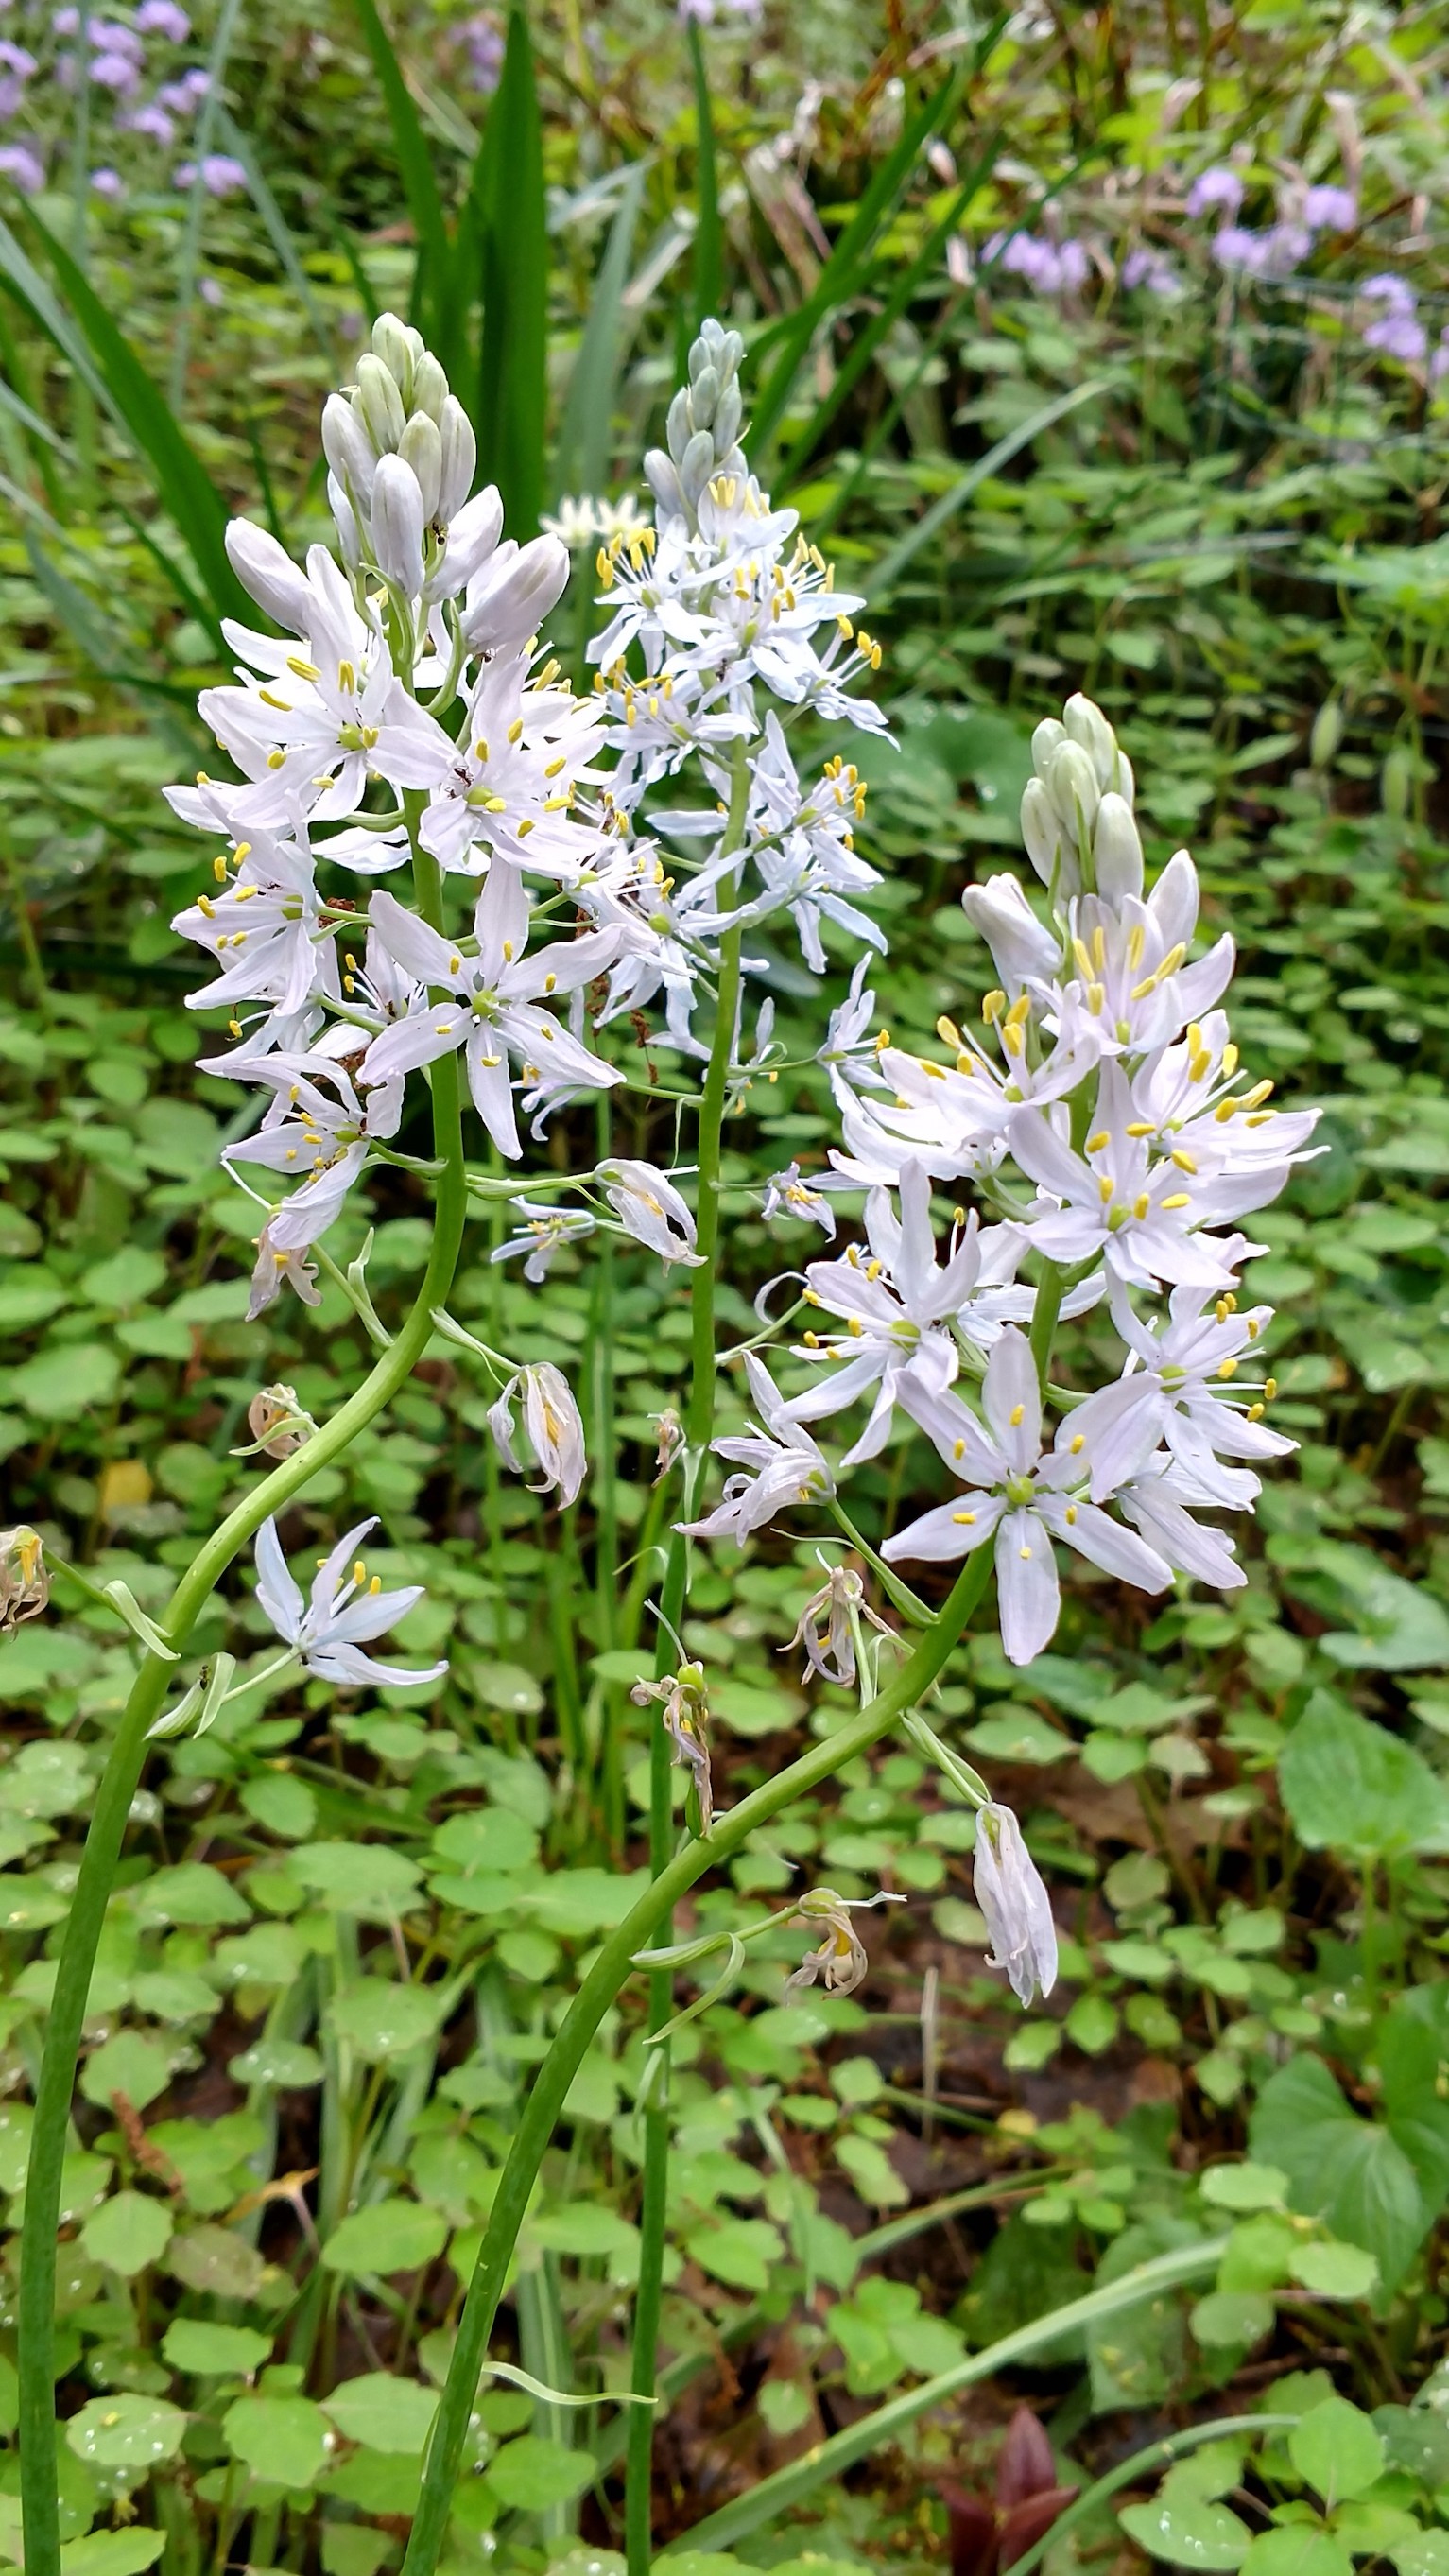 The Scientific Name is Camassia scilloides. You will likely hear them called Wild Hyacinth, Quamash Lily, Eastern Camas Lily. This picture shows the Close-up of racemes of light blue flowers of Camassia scilloides